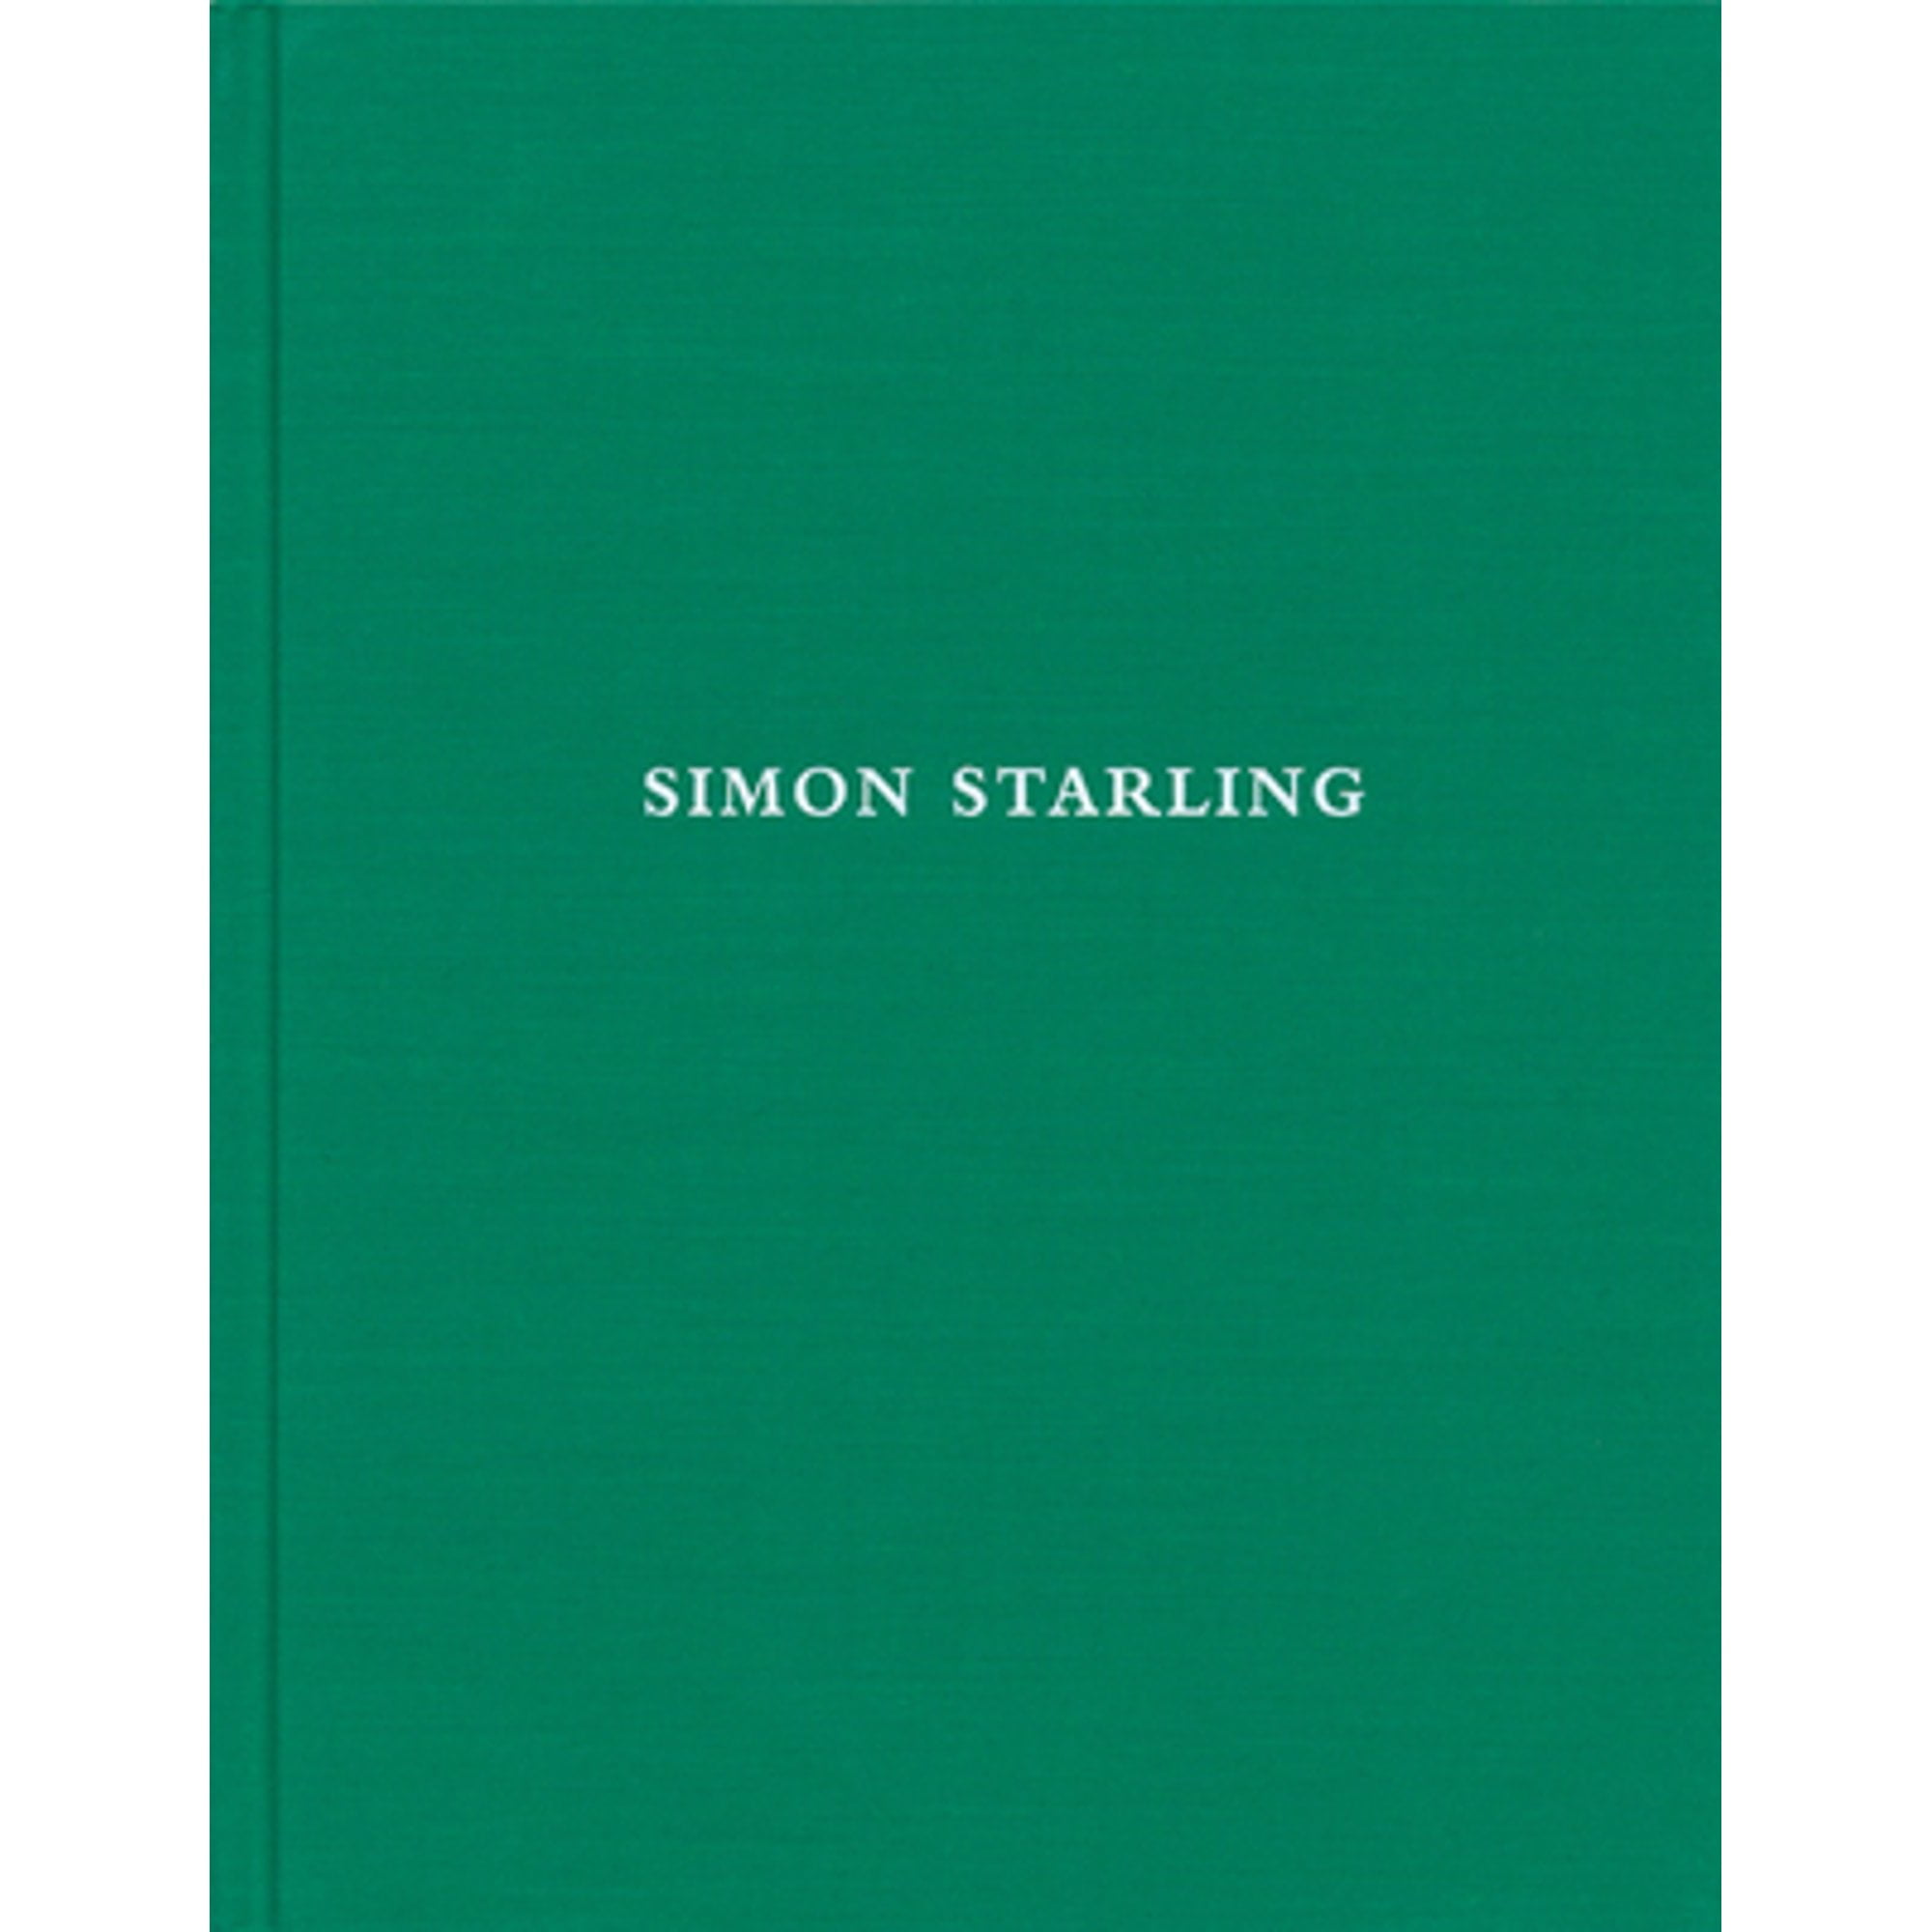 Pre-Owned Simon Starling (Hardcover 9781646570188) by Simon Starling, Will Bradley, Jon Wood